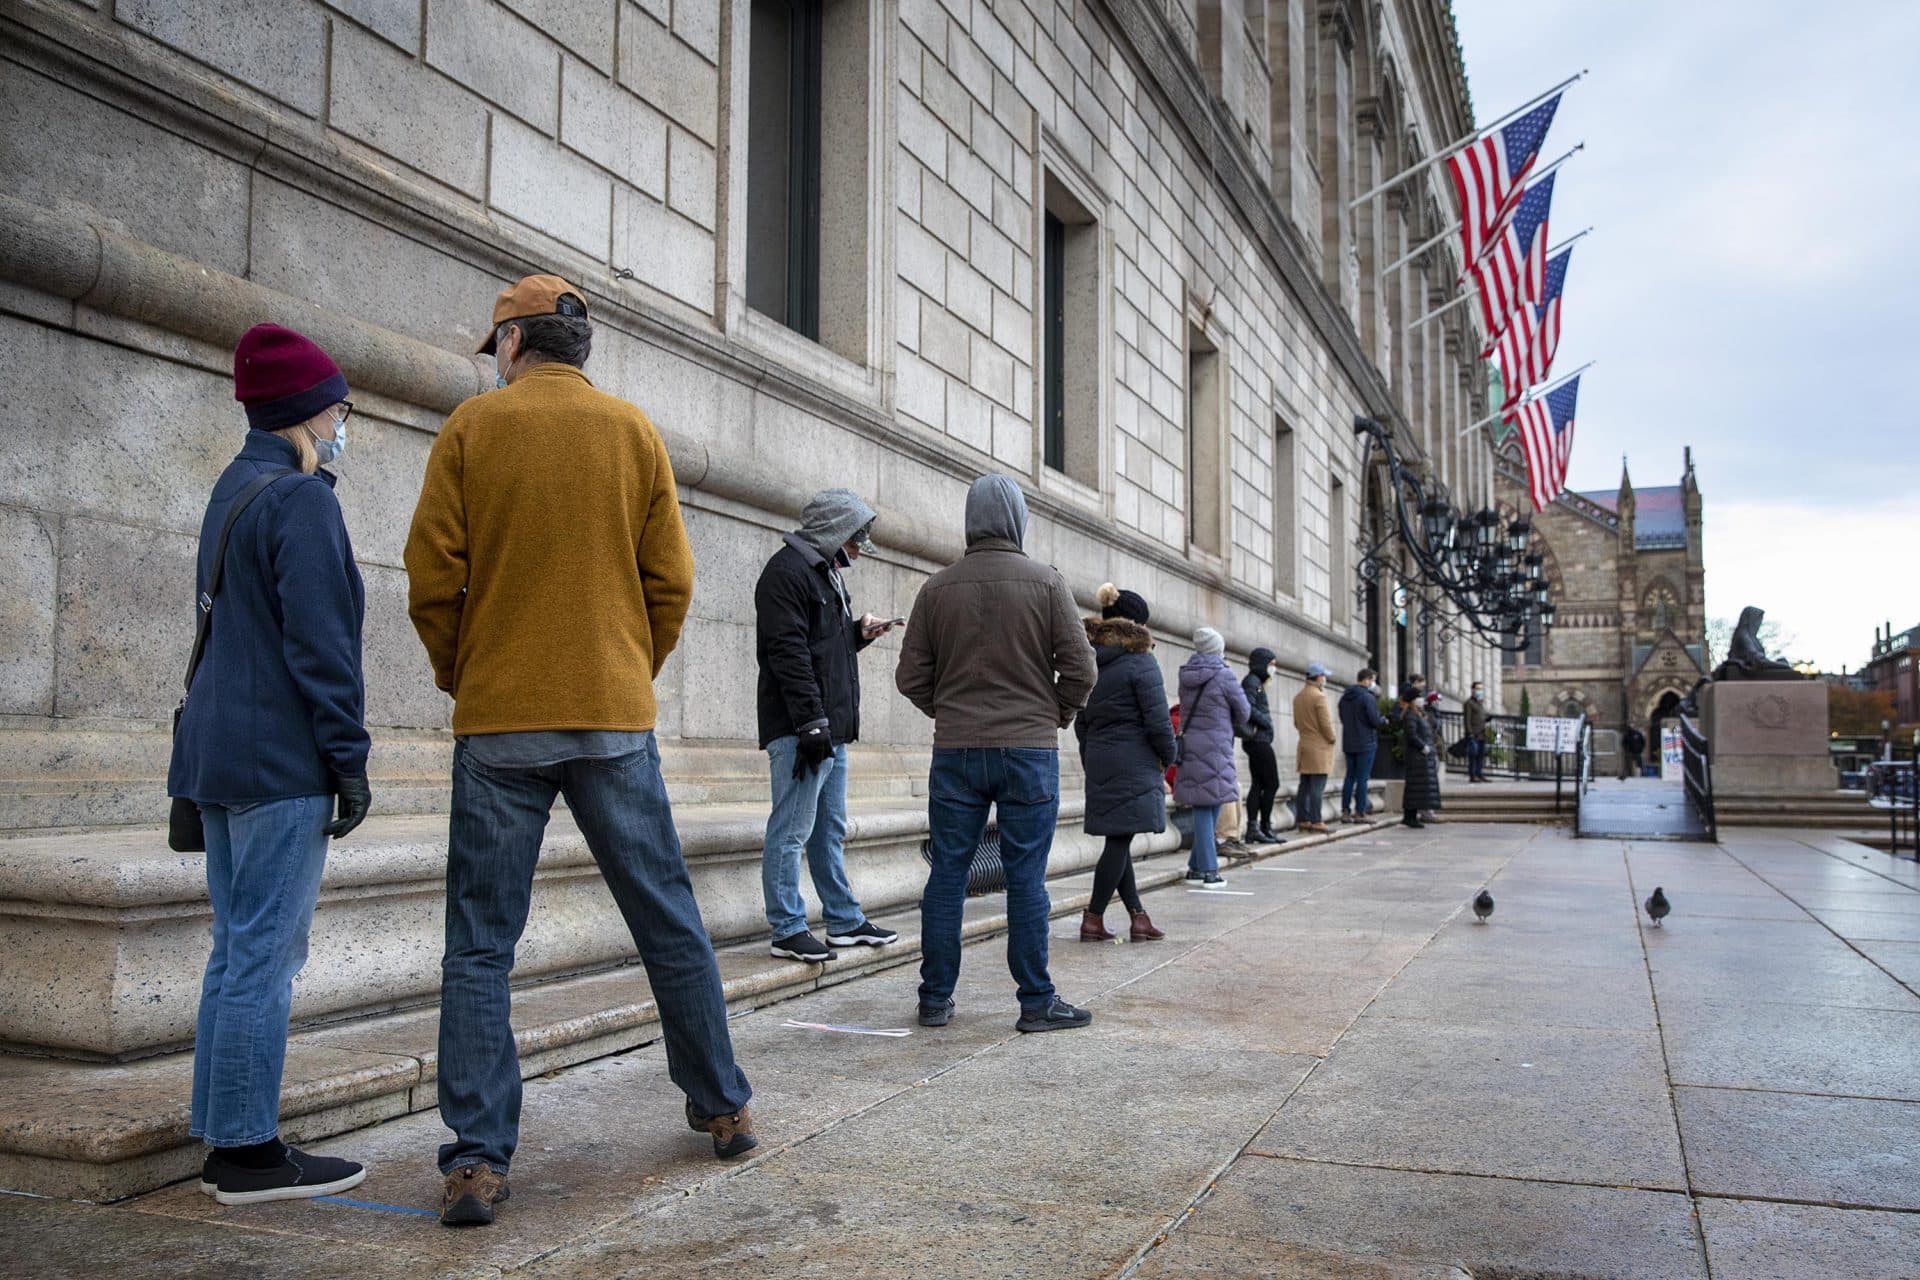 Voters line up to cast ballots at the Boston Public Library. (Robin Lubbock/WBUR)